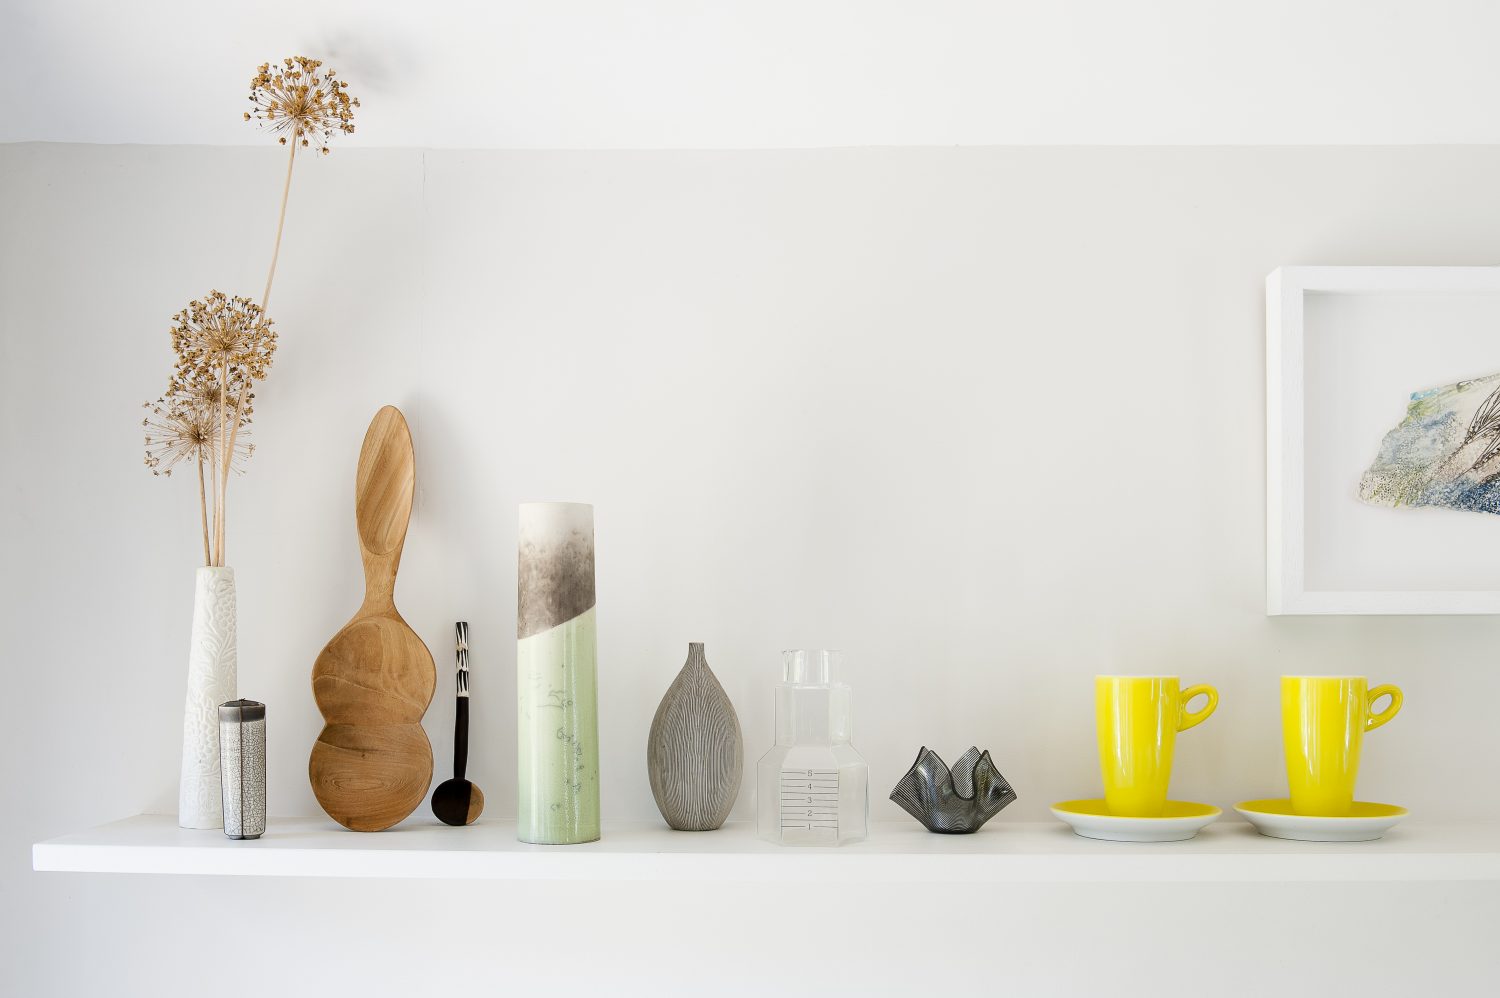 Karen’s new kitchen has opened up the whole house, making the space much more useable for the family. Ceramics by Kate Schuricht are mixed with other objects on a shelf above the sink